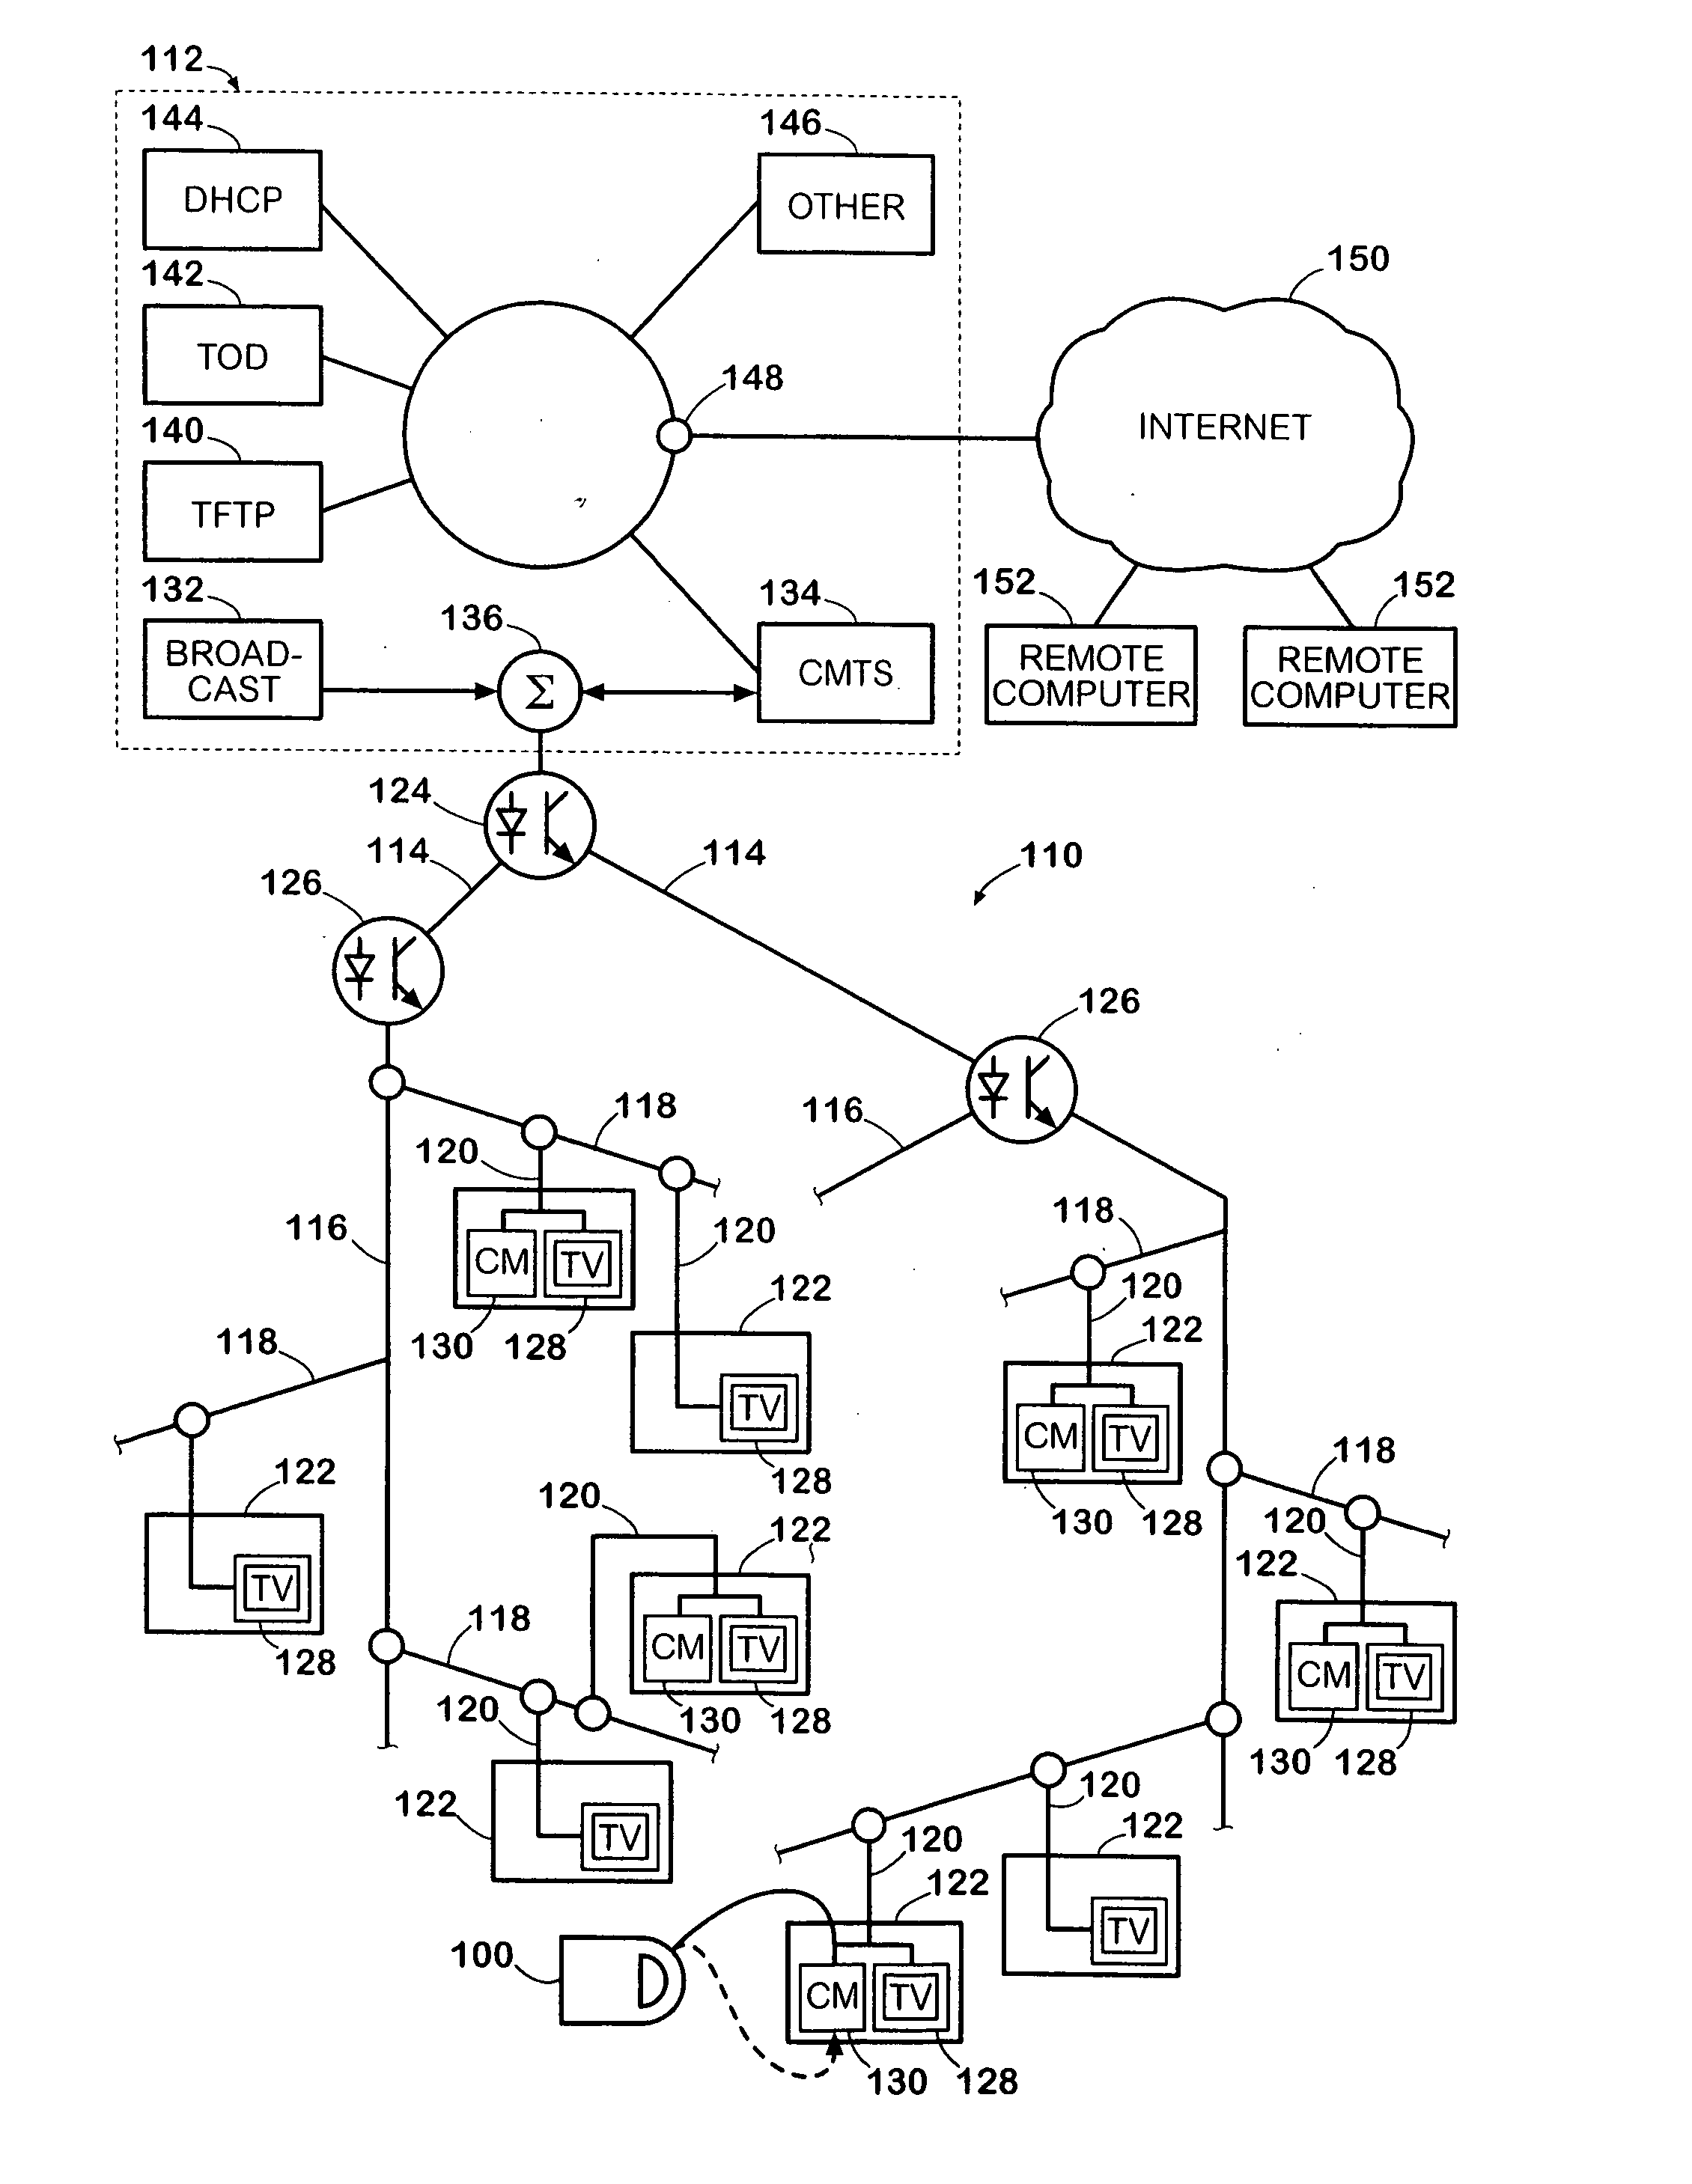 Communication network analysis apparatus with internetwork connectivity